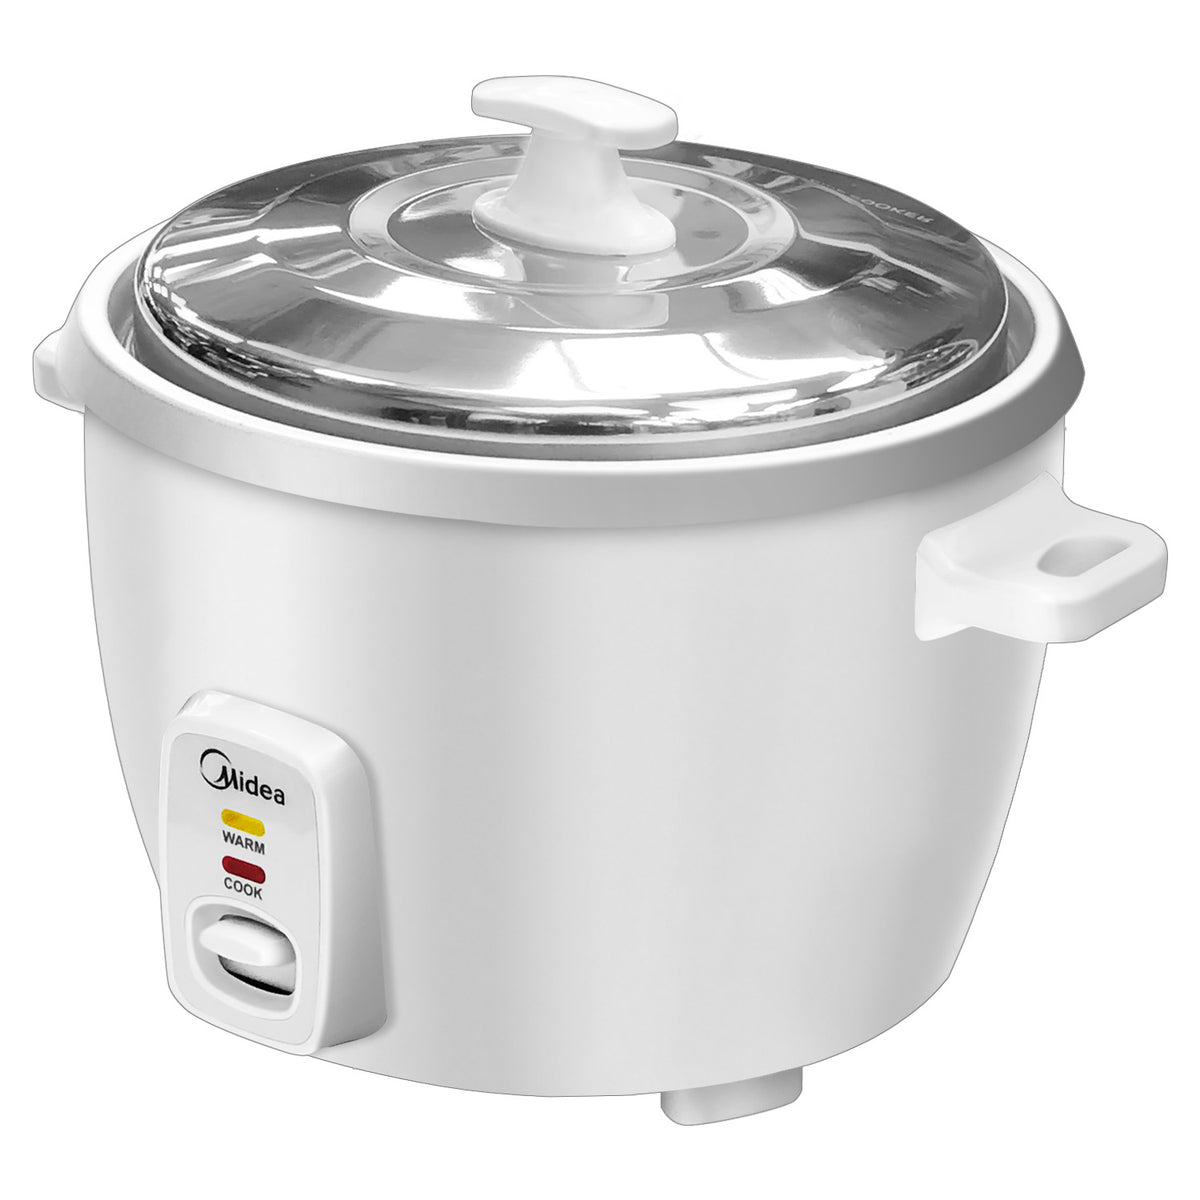 Asters - Midea - World's largest rice cooker manufacturer